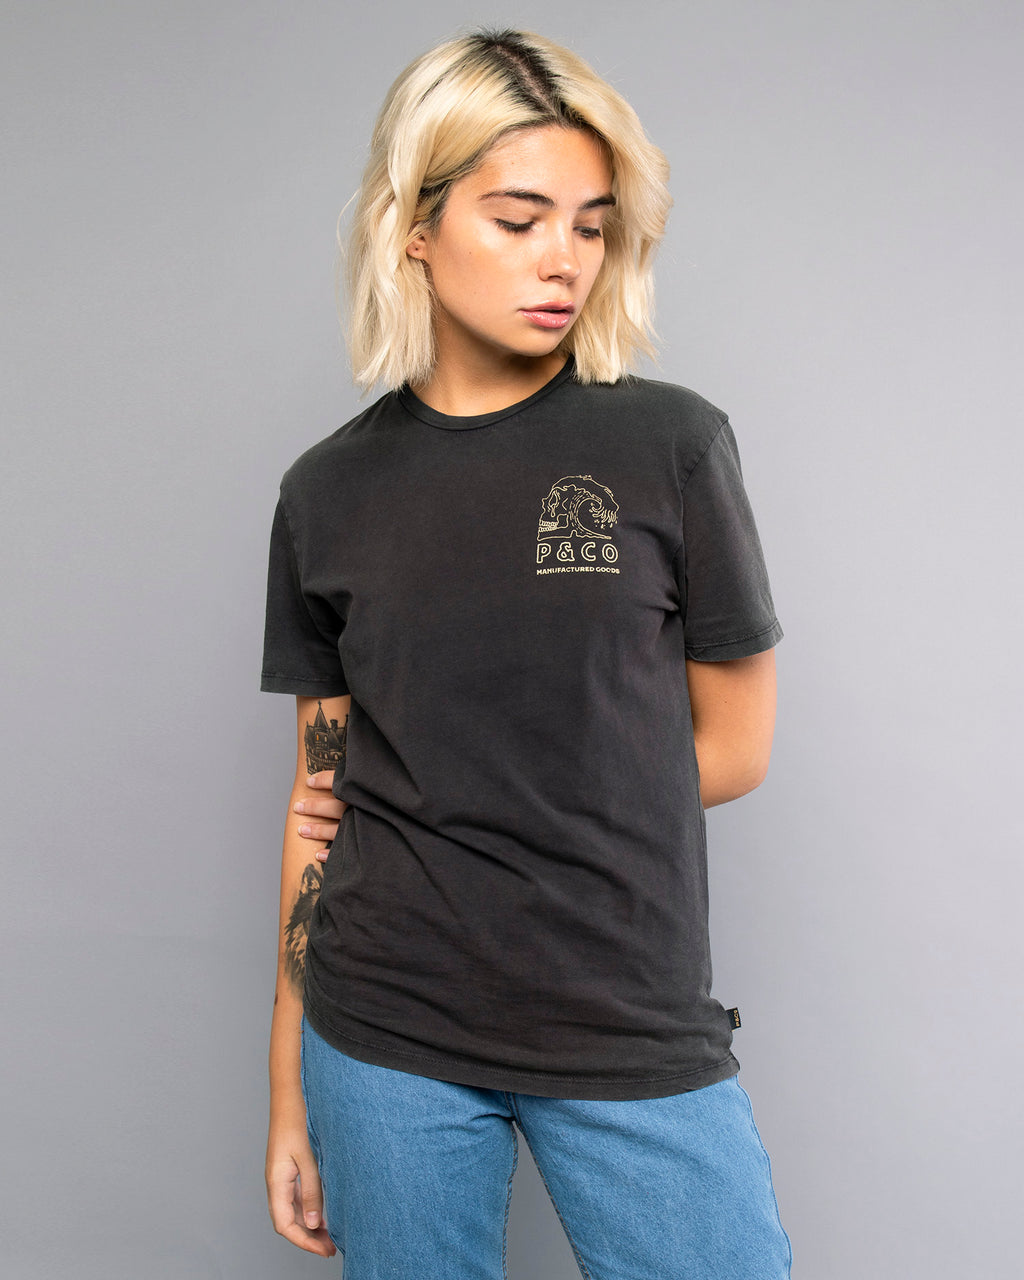 Slaves to the Waves T-Shirt – P&Co